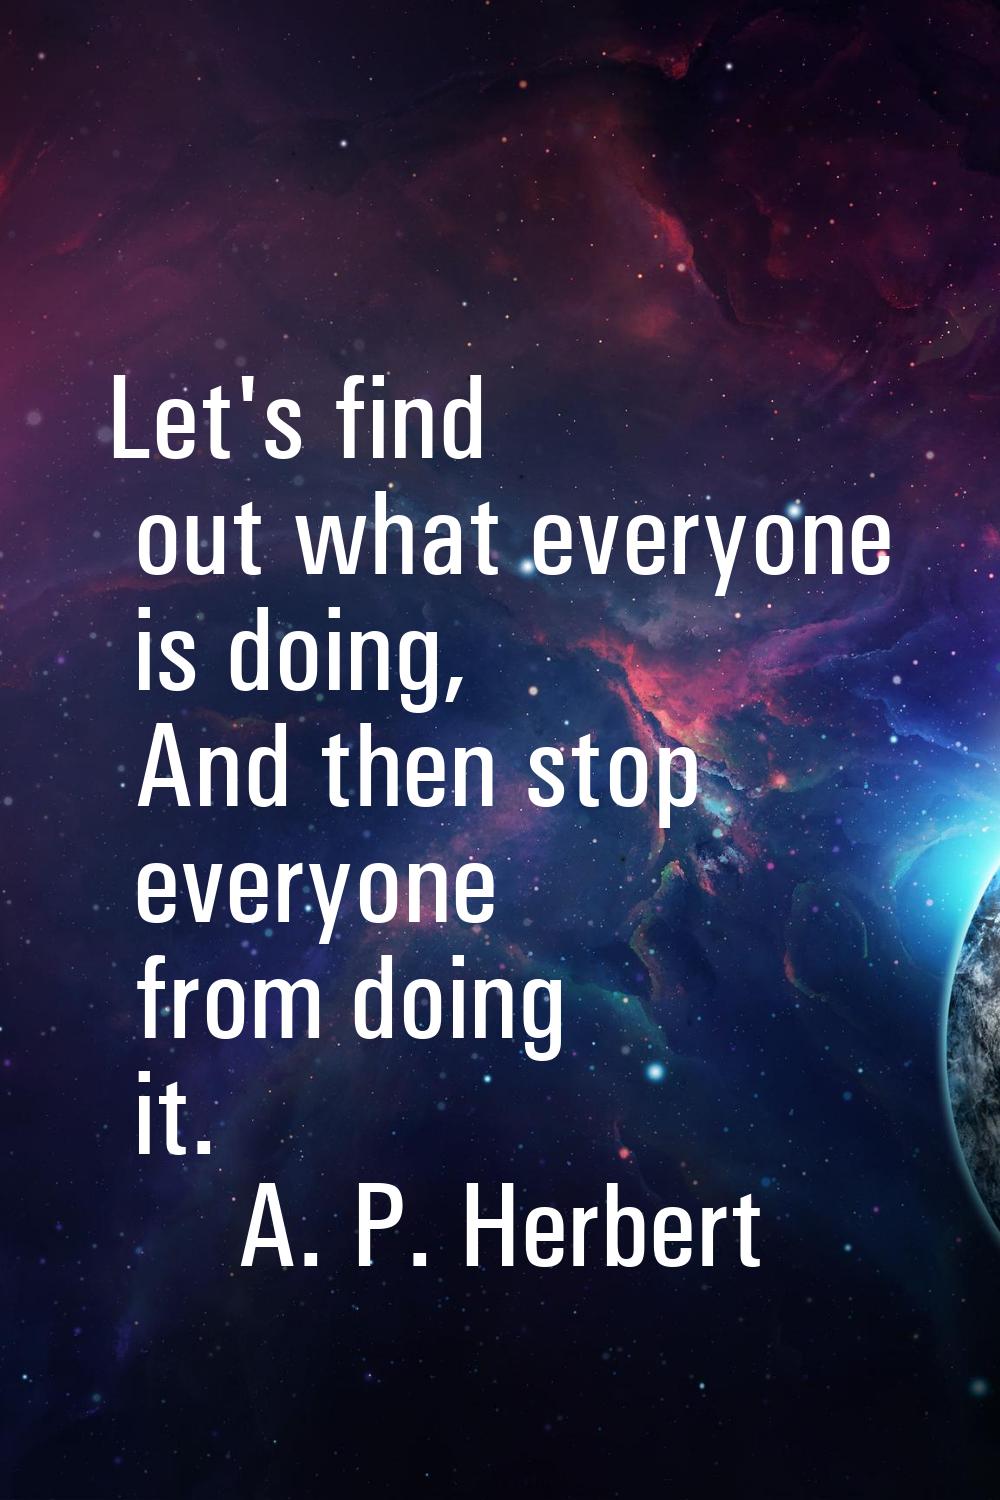 Let's find out what everyone is doing, And then stop everyone from doing it.